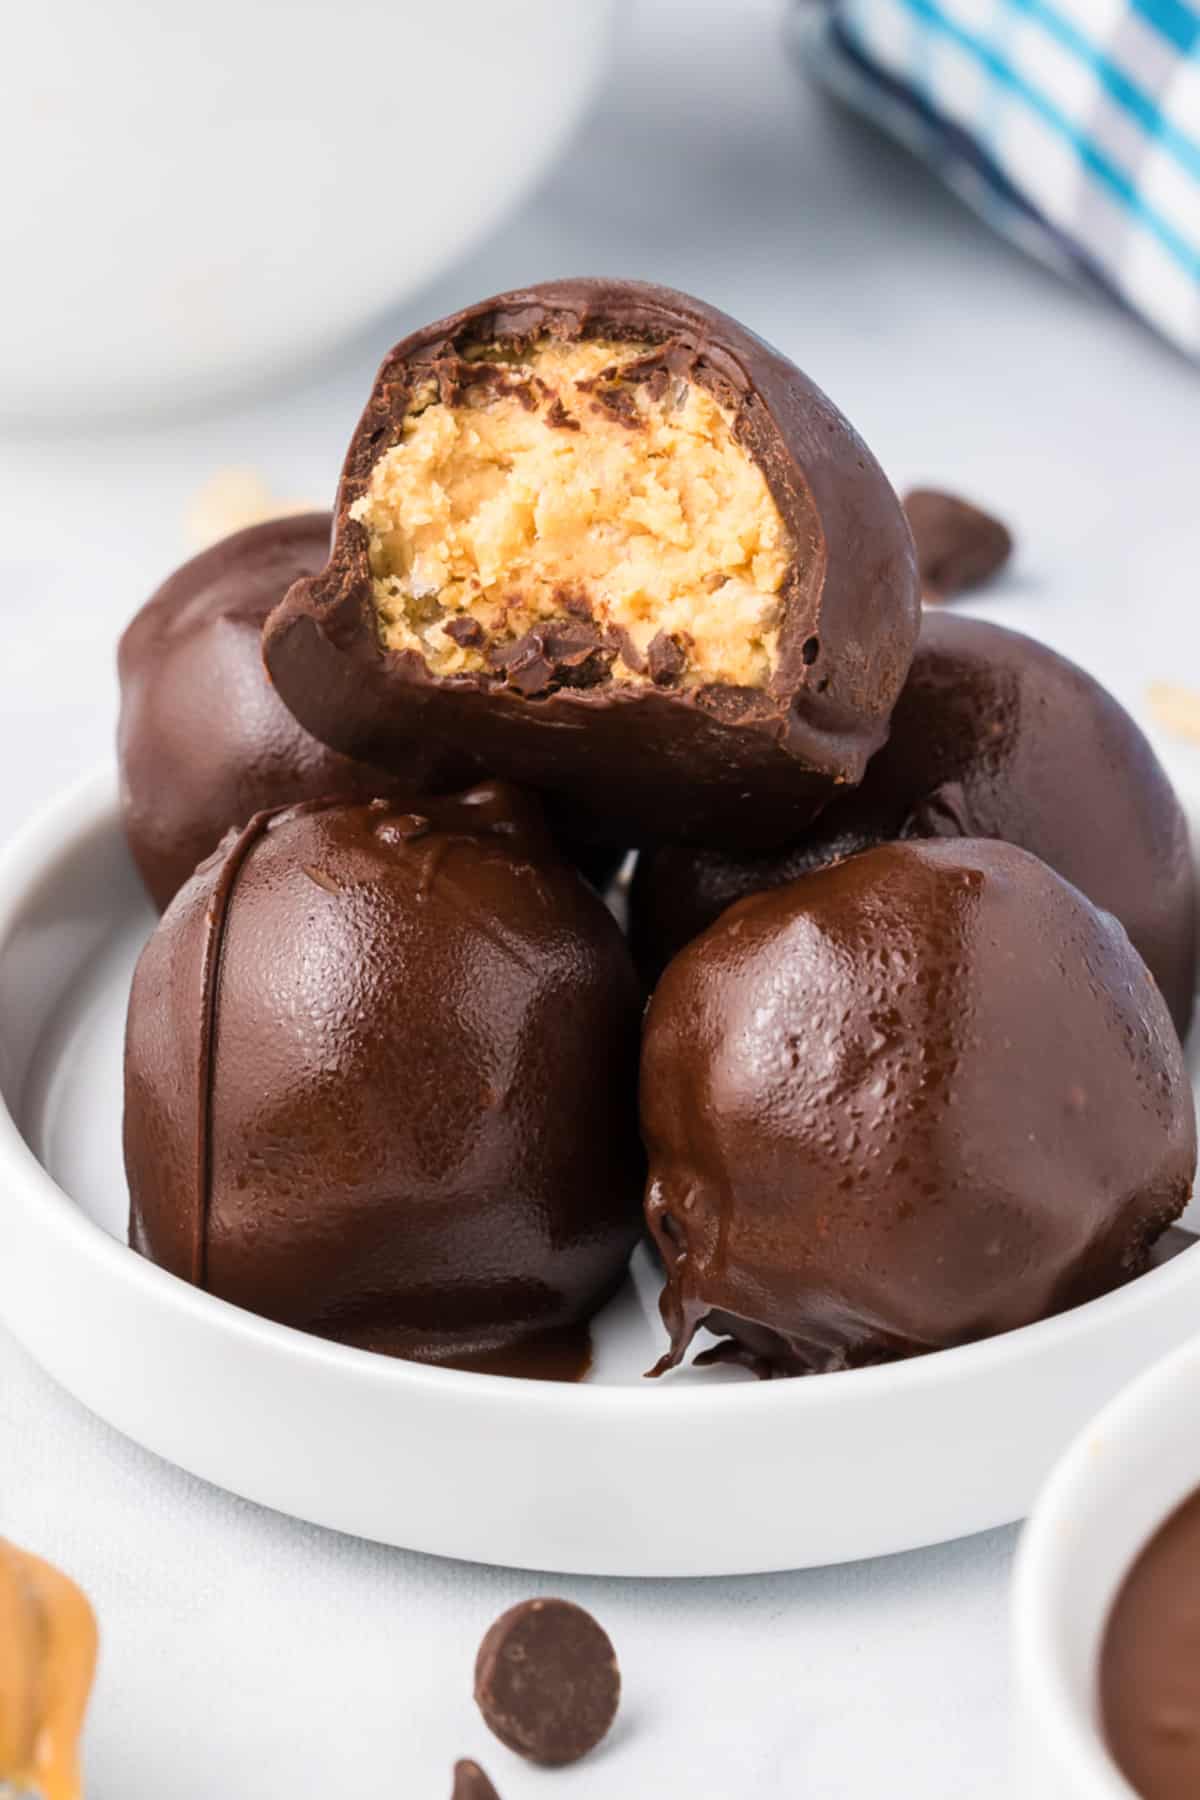 Peanut butter balls with rice krispies stacked on a small plate on a counter from the side with the top truffle missing a bite to see the inside.